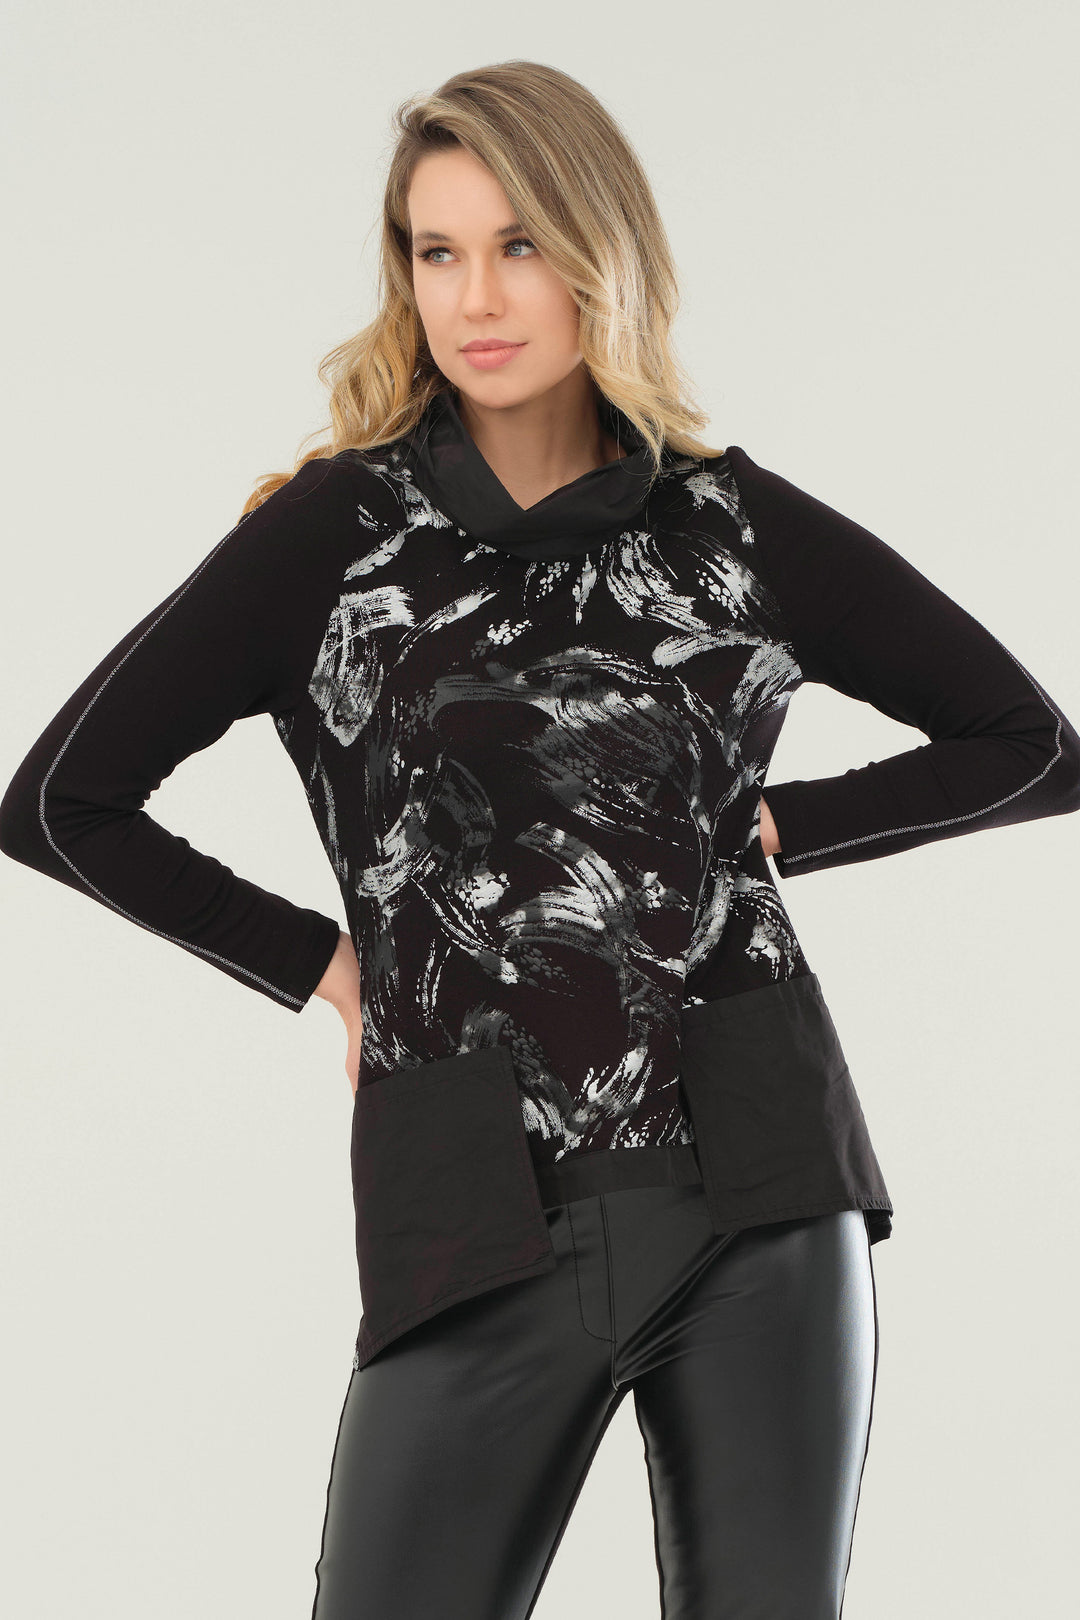 Crafted from an alluring brushstroke motif design, this sharp tunic features waist tie detailing for an adjustable fit.